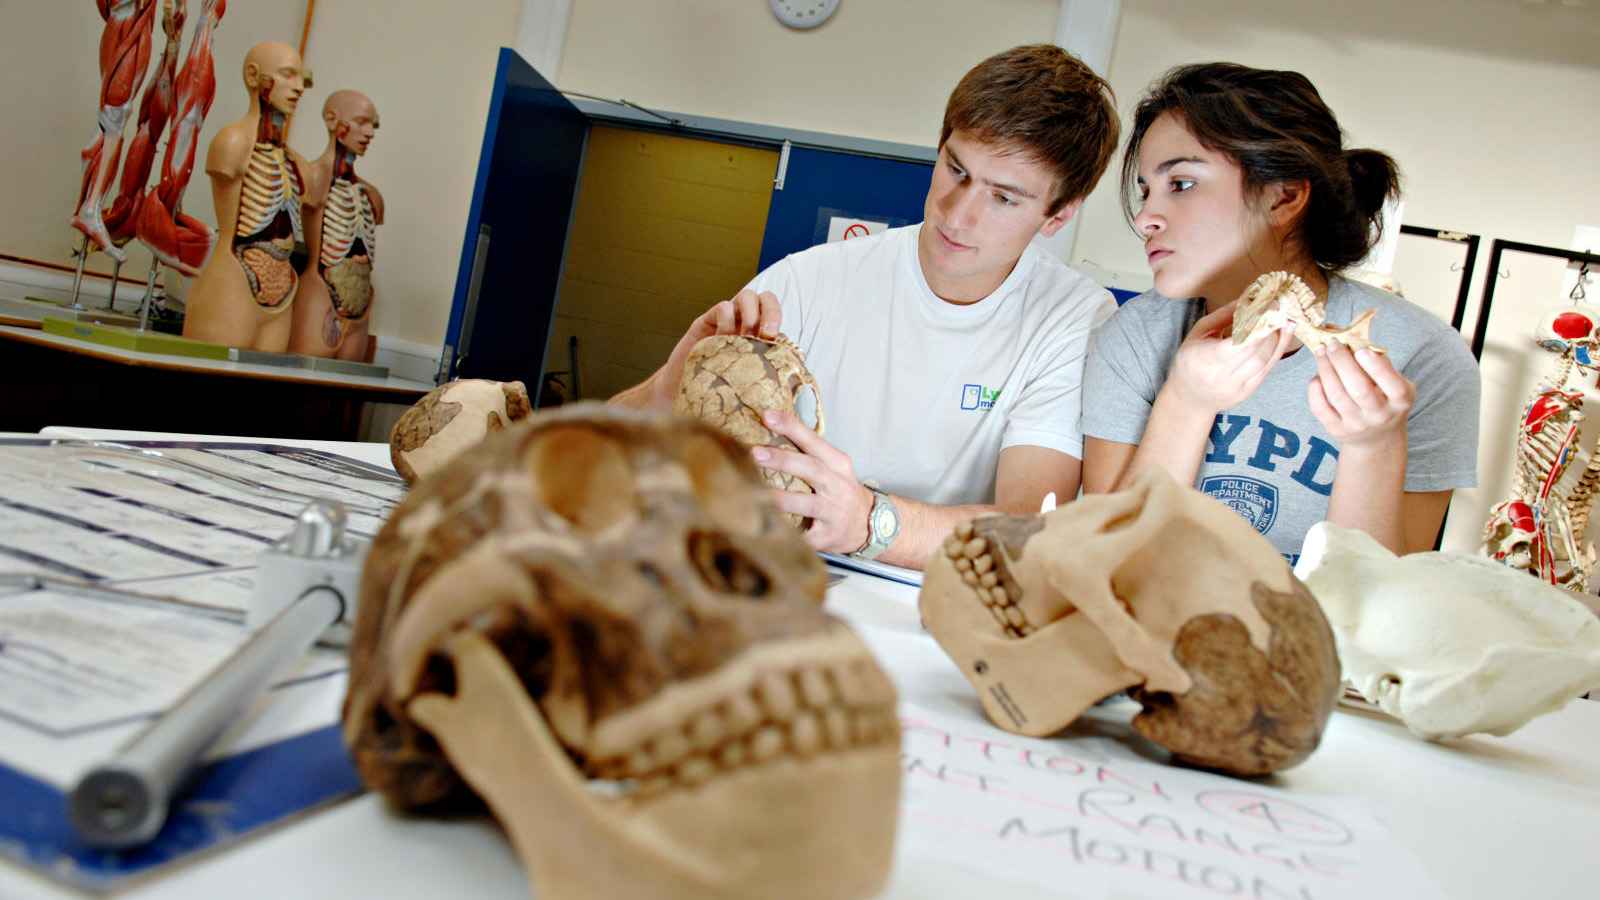 Human Biology students working in the anatomy lab